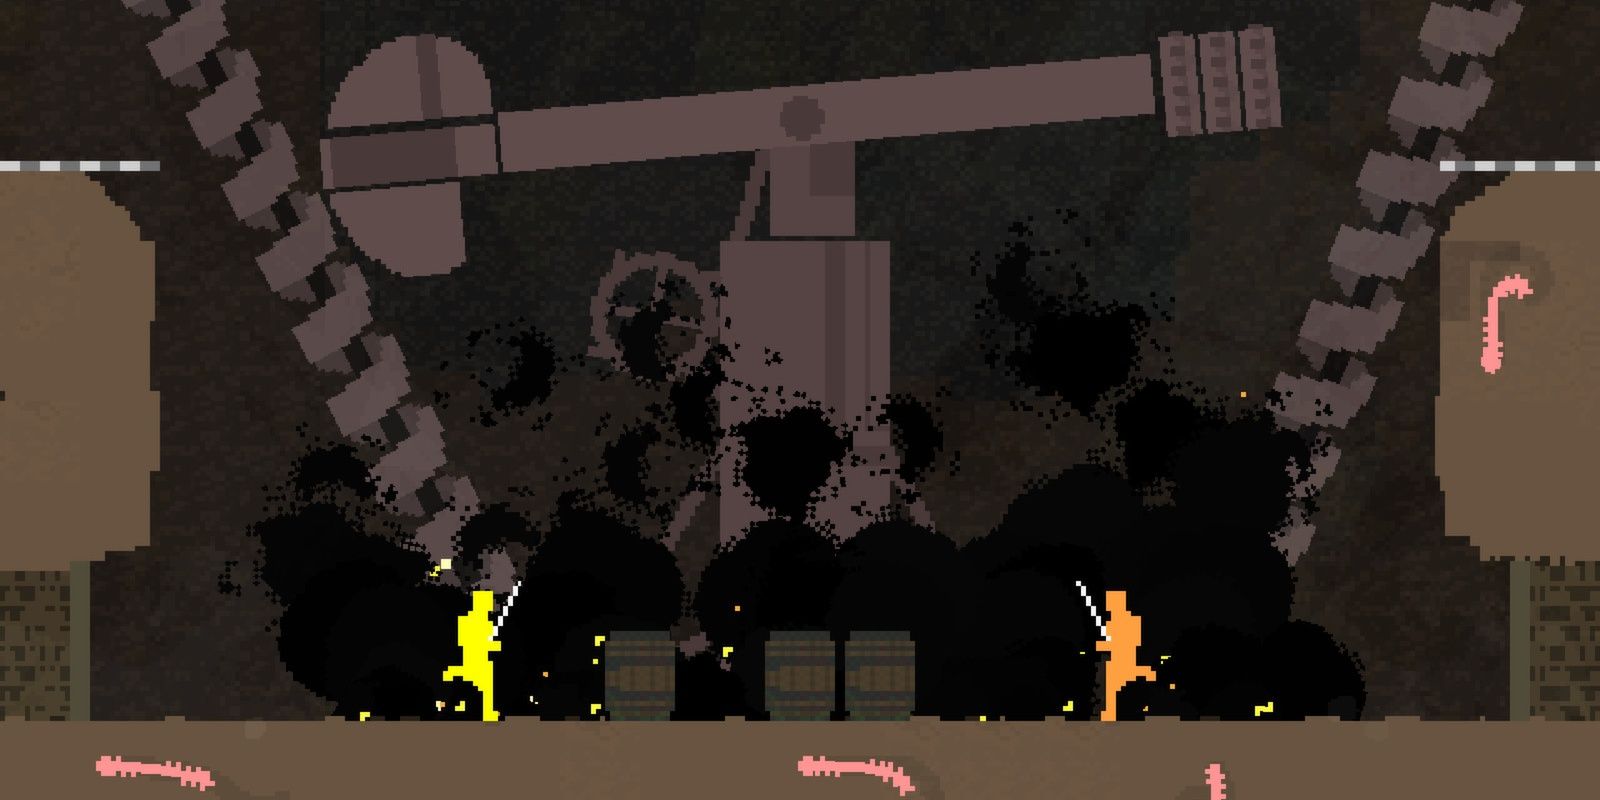 A Nidhogg screenshot of the two characters charging each other with swords and an Oil Rig in the background